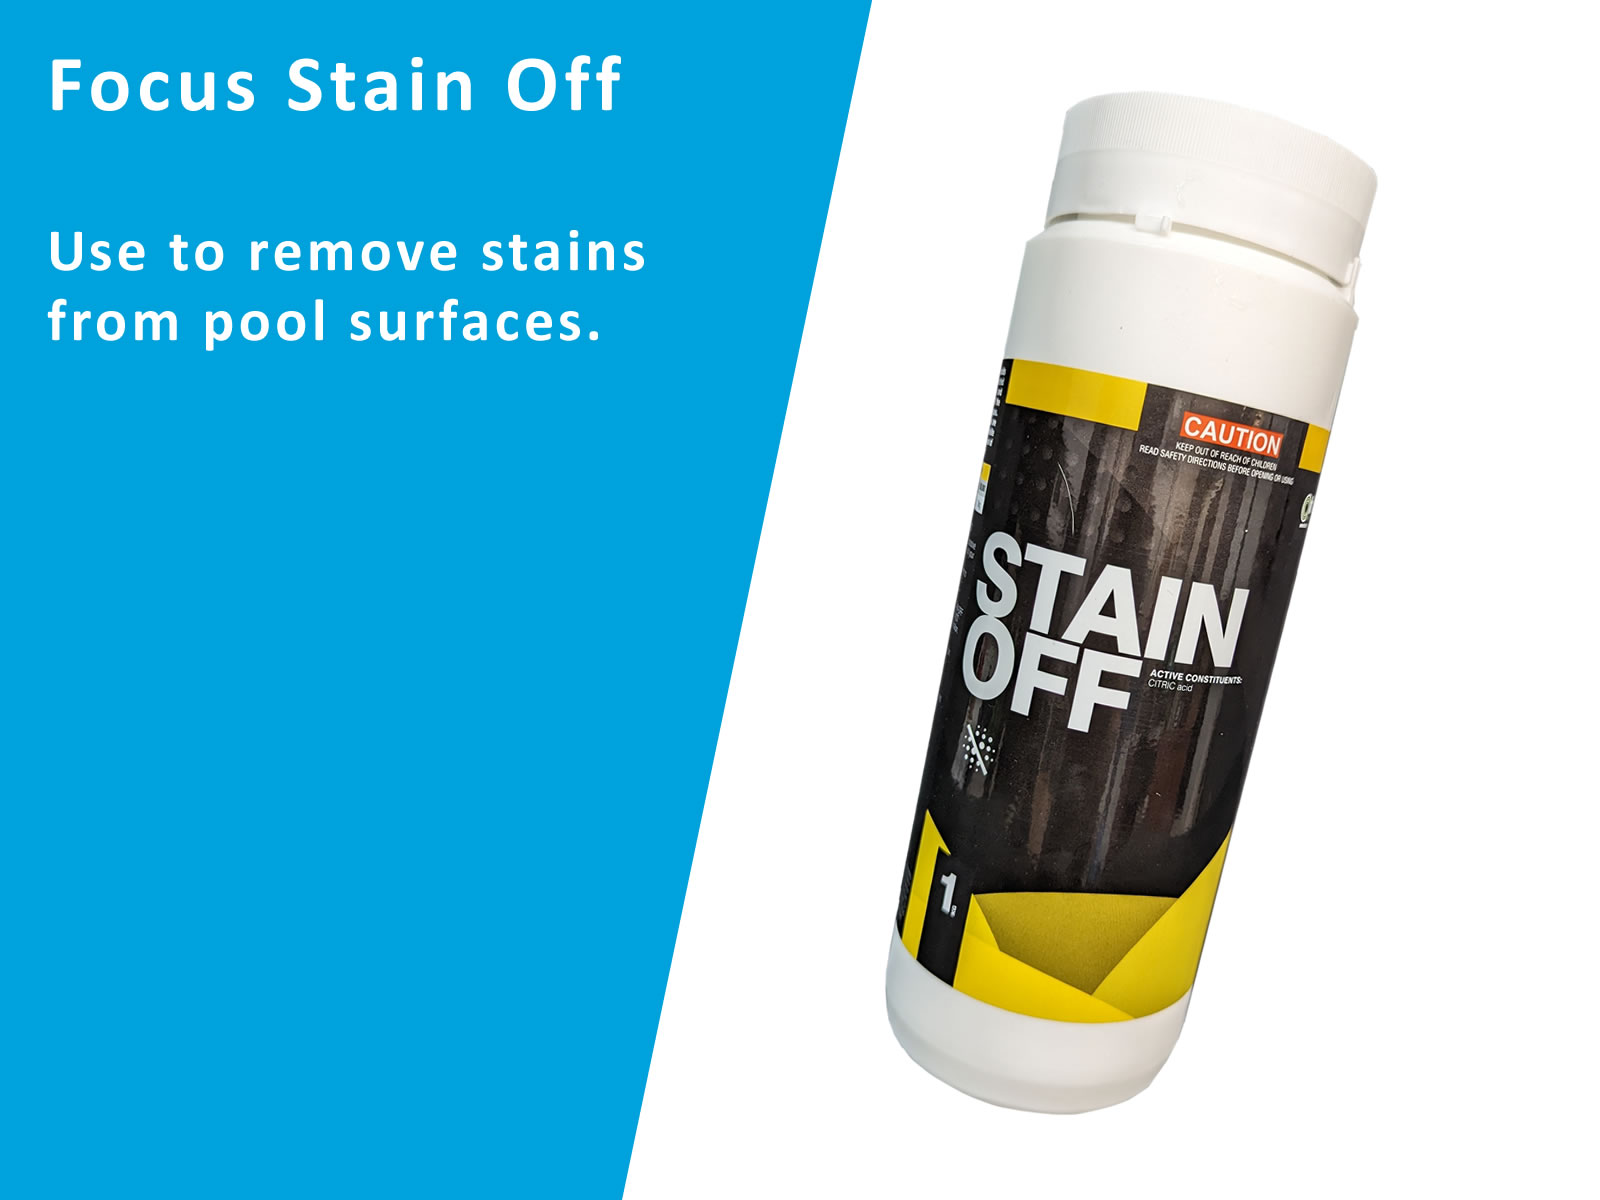 Focus Stain Off for removing organic leave and other stains from pool surfaces